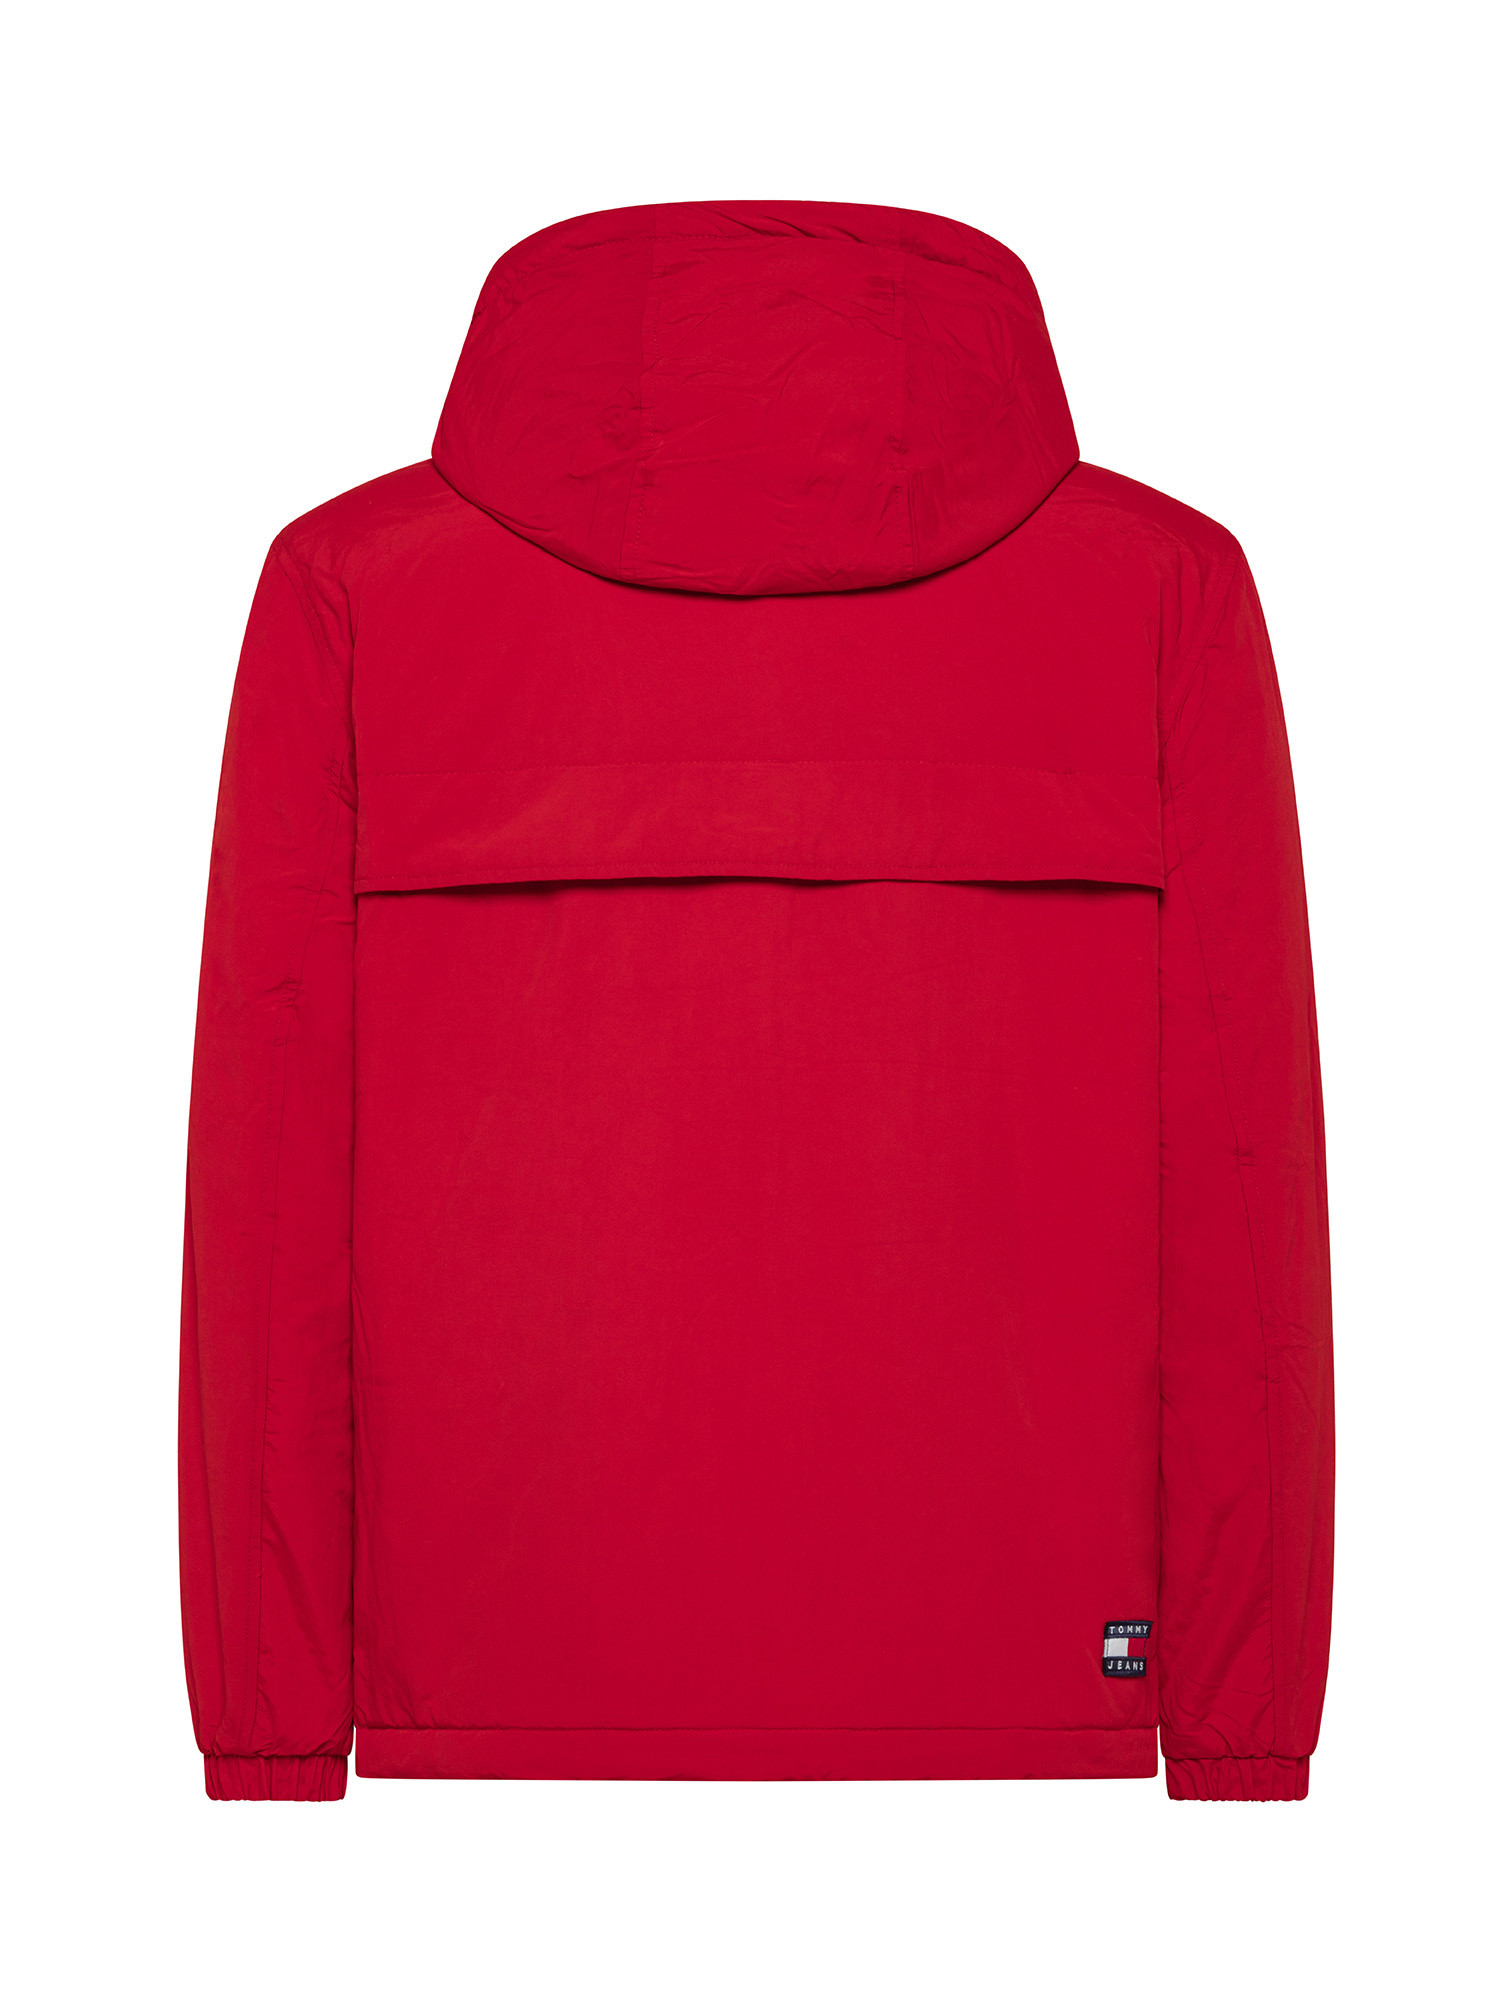 Tommy Jeans - Lightweight hooded jacket, Red, large image number 1